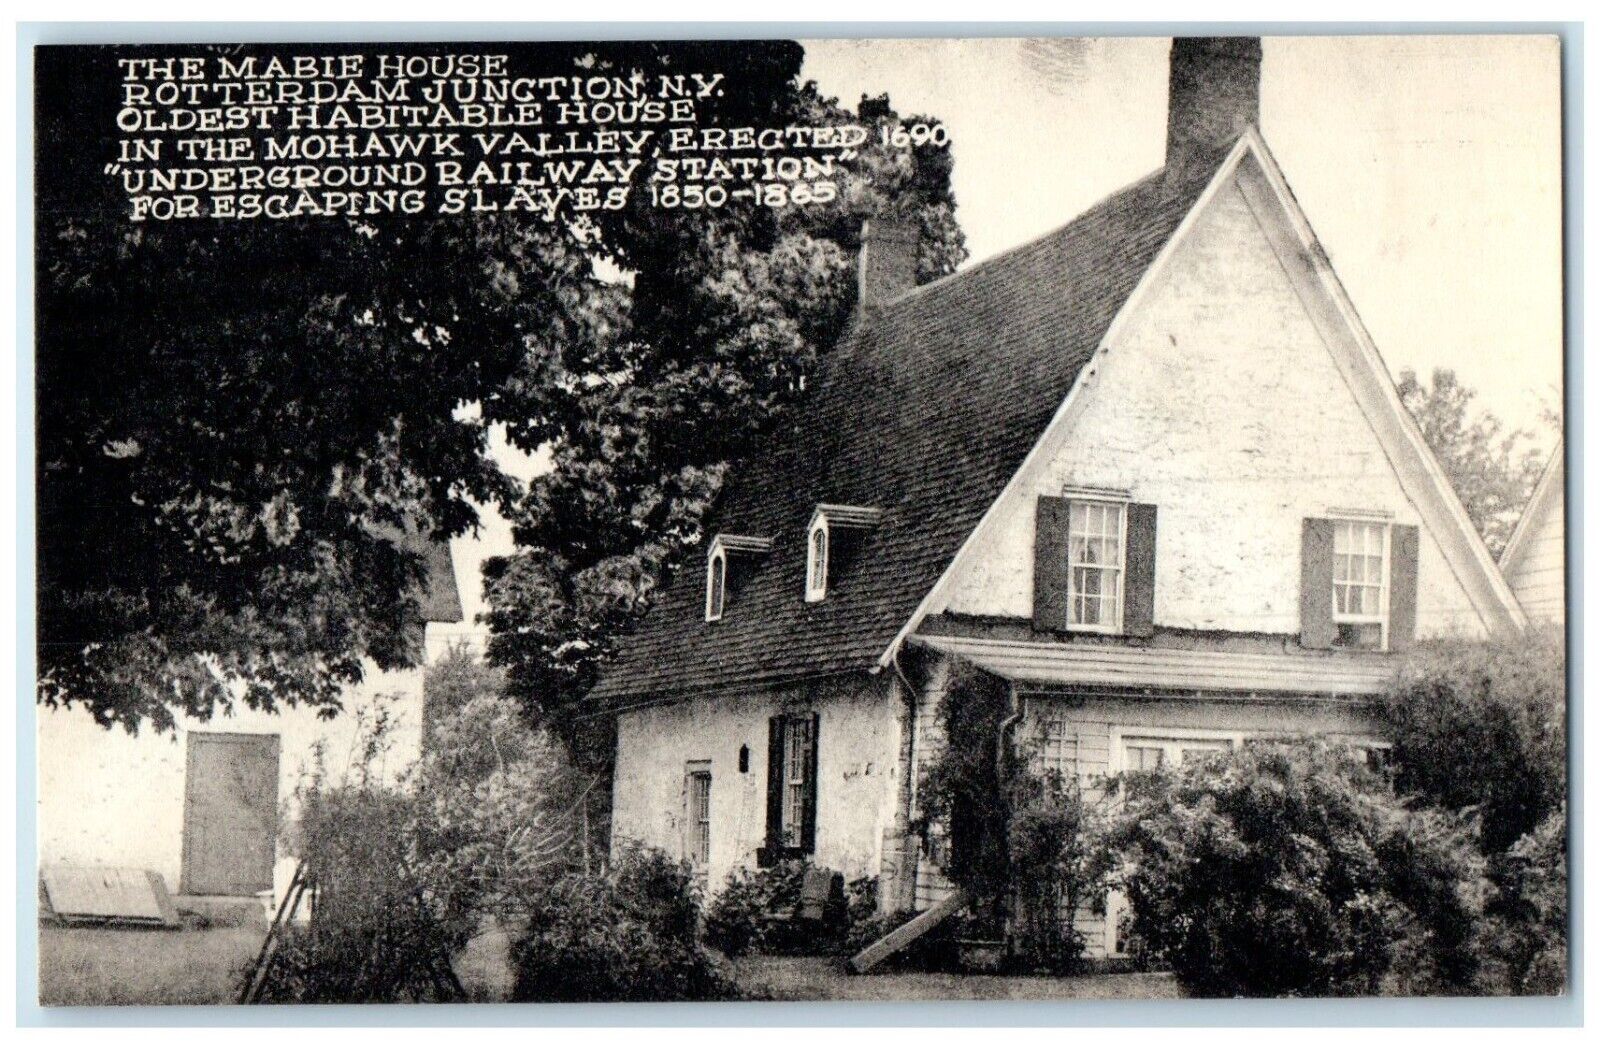 The Mable House Rotterdam Junction New York NY, Oldest Habitable House Postcard